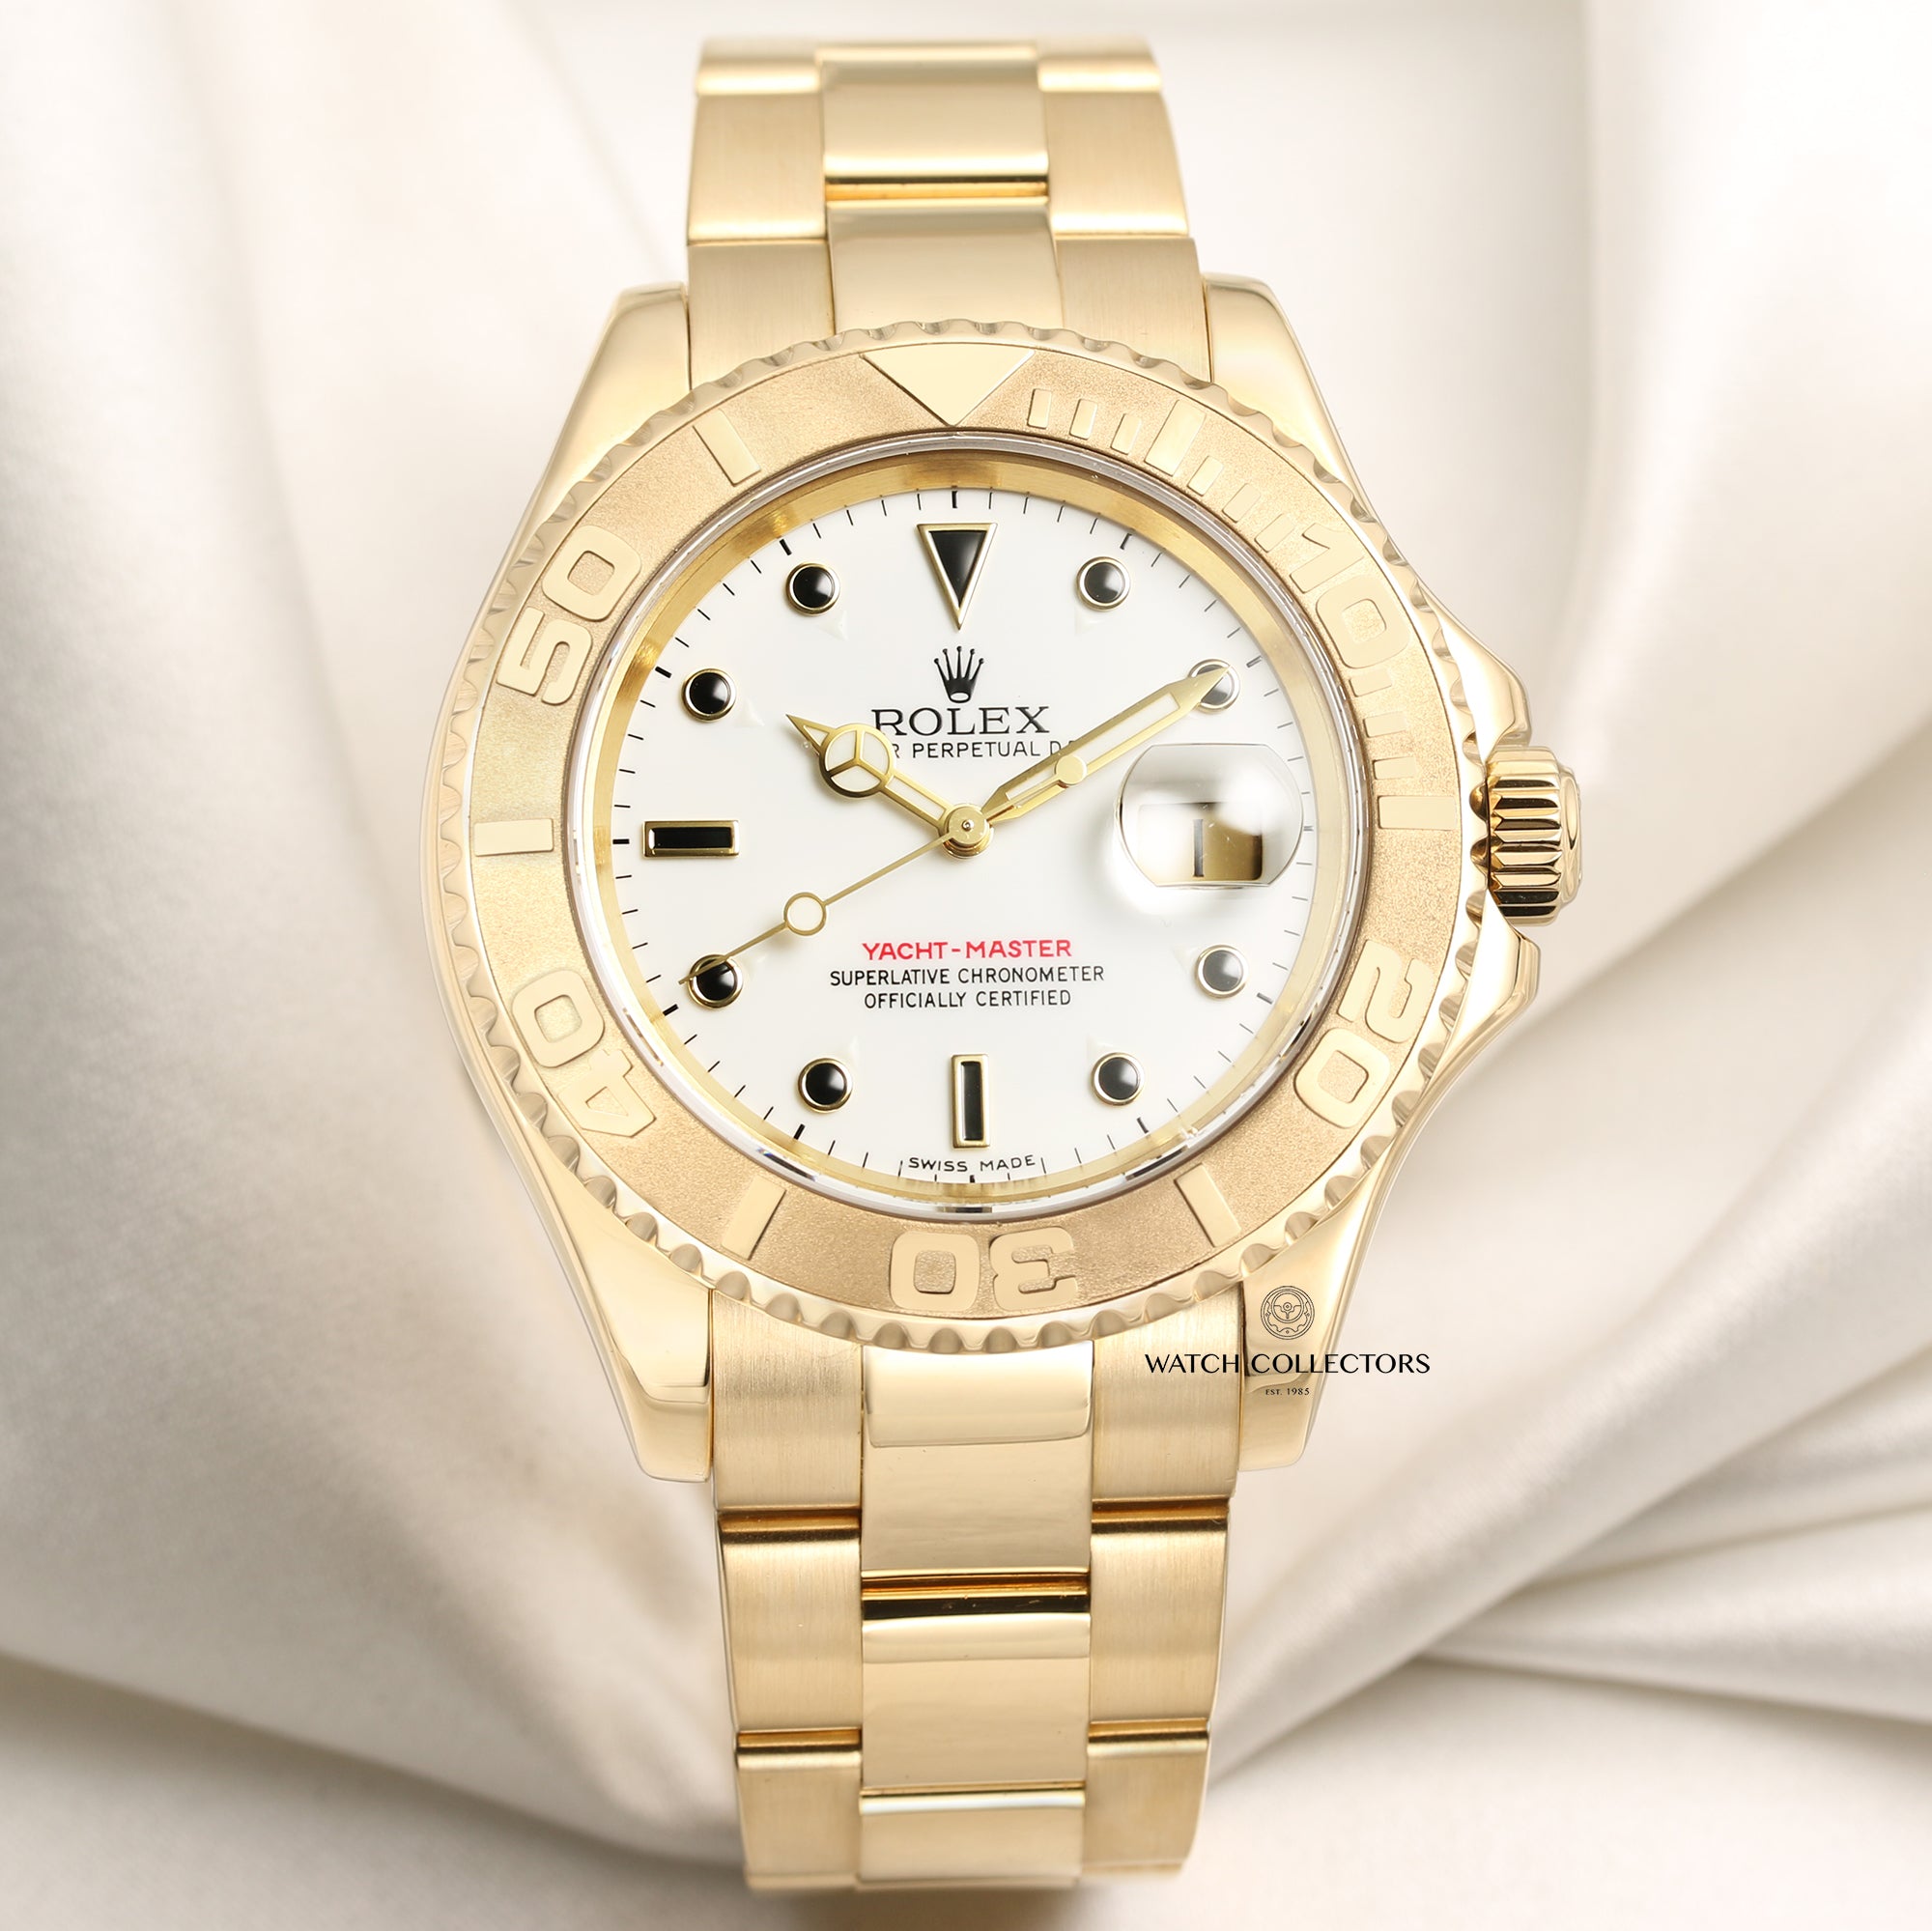 Rolex Yacht-Master 16628B 18k Yellow Gold – Watch Collectors